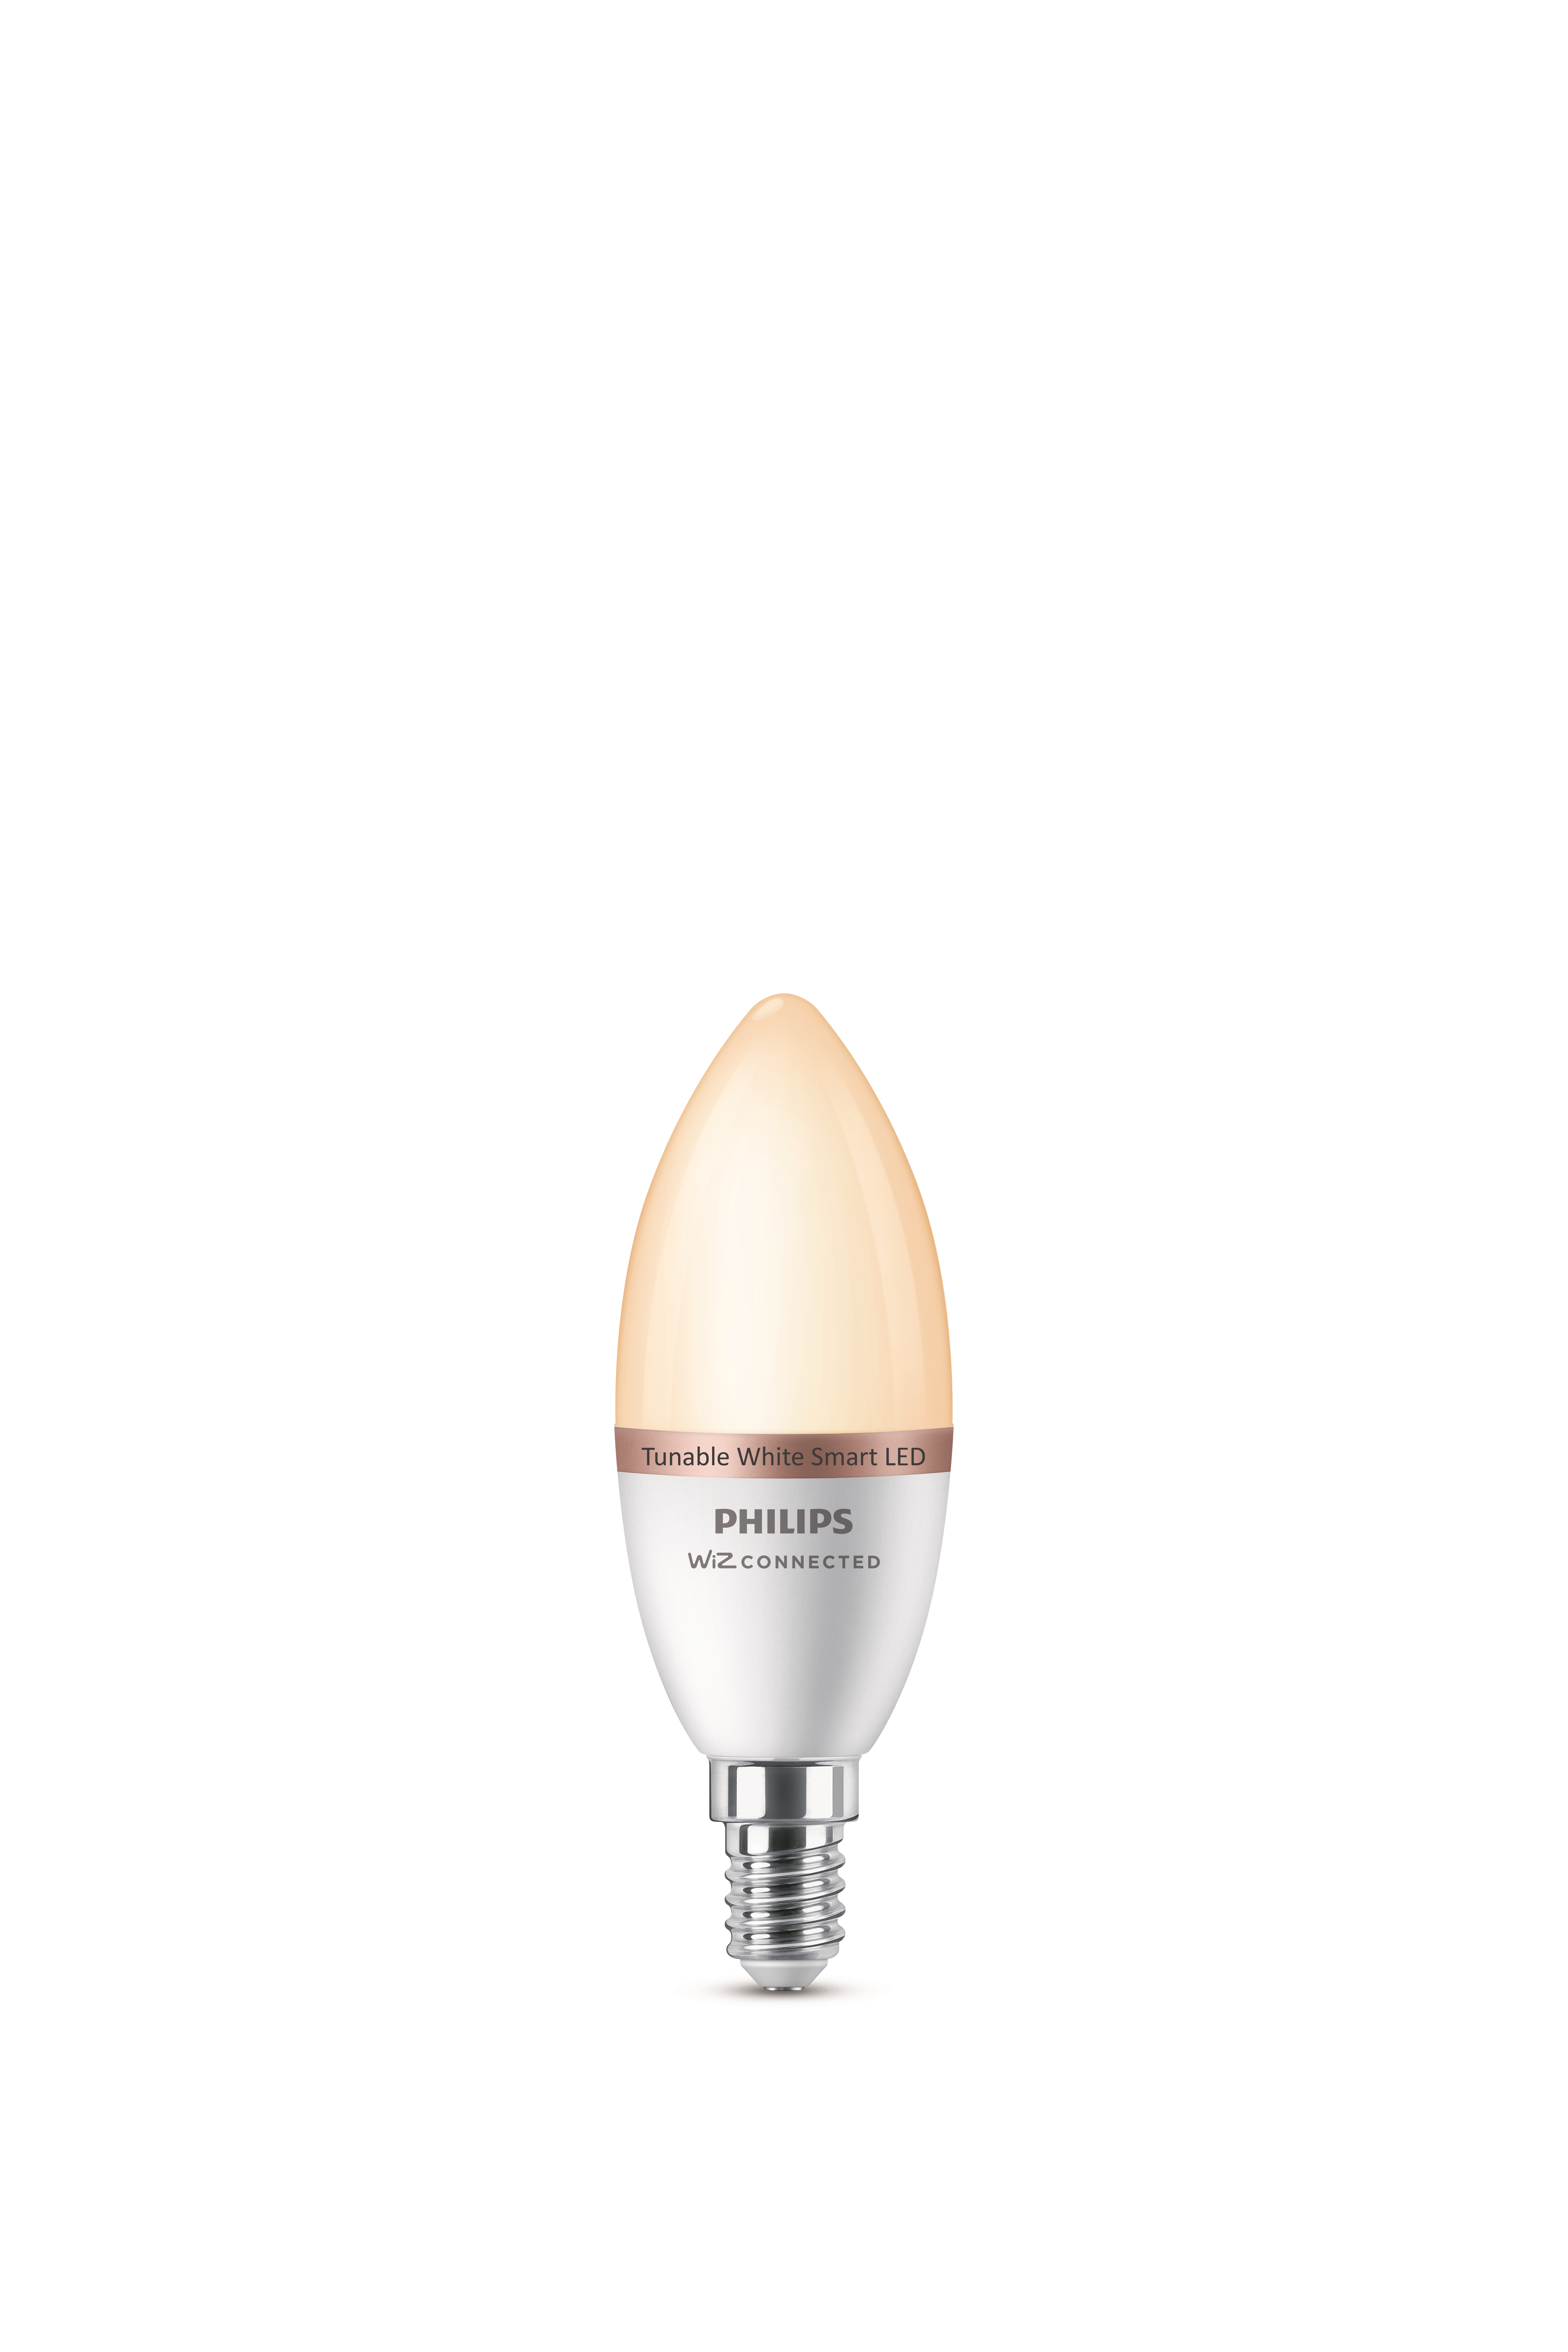 PHILIPS Smart LED E14, WiZ connected, 4,9 W, 470 lm, satiniert, dimmbar